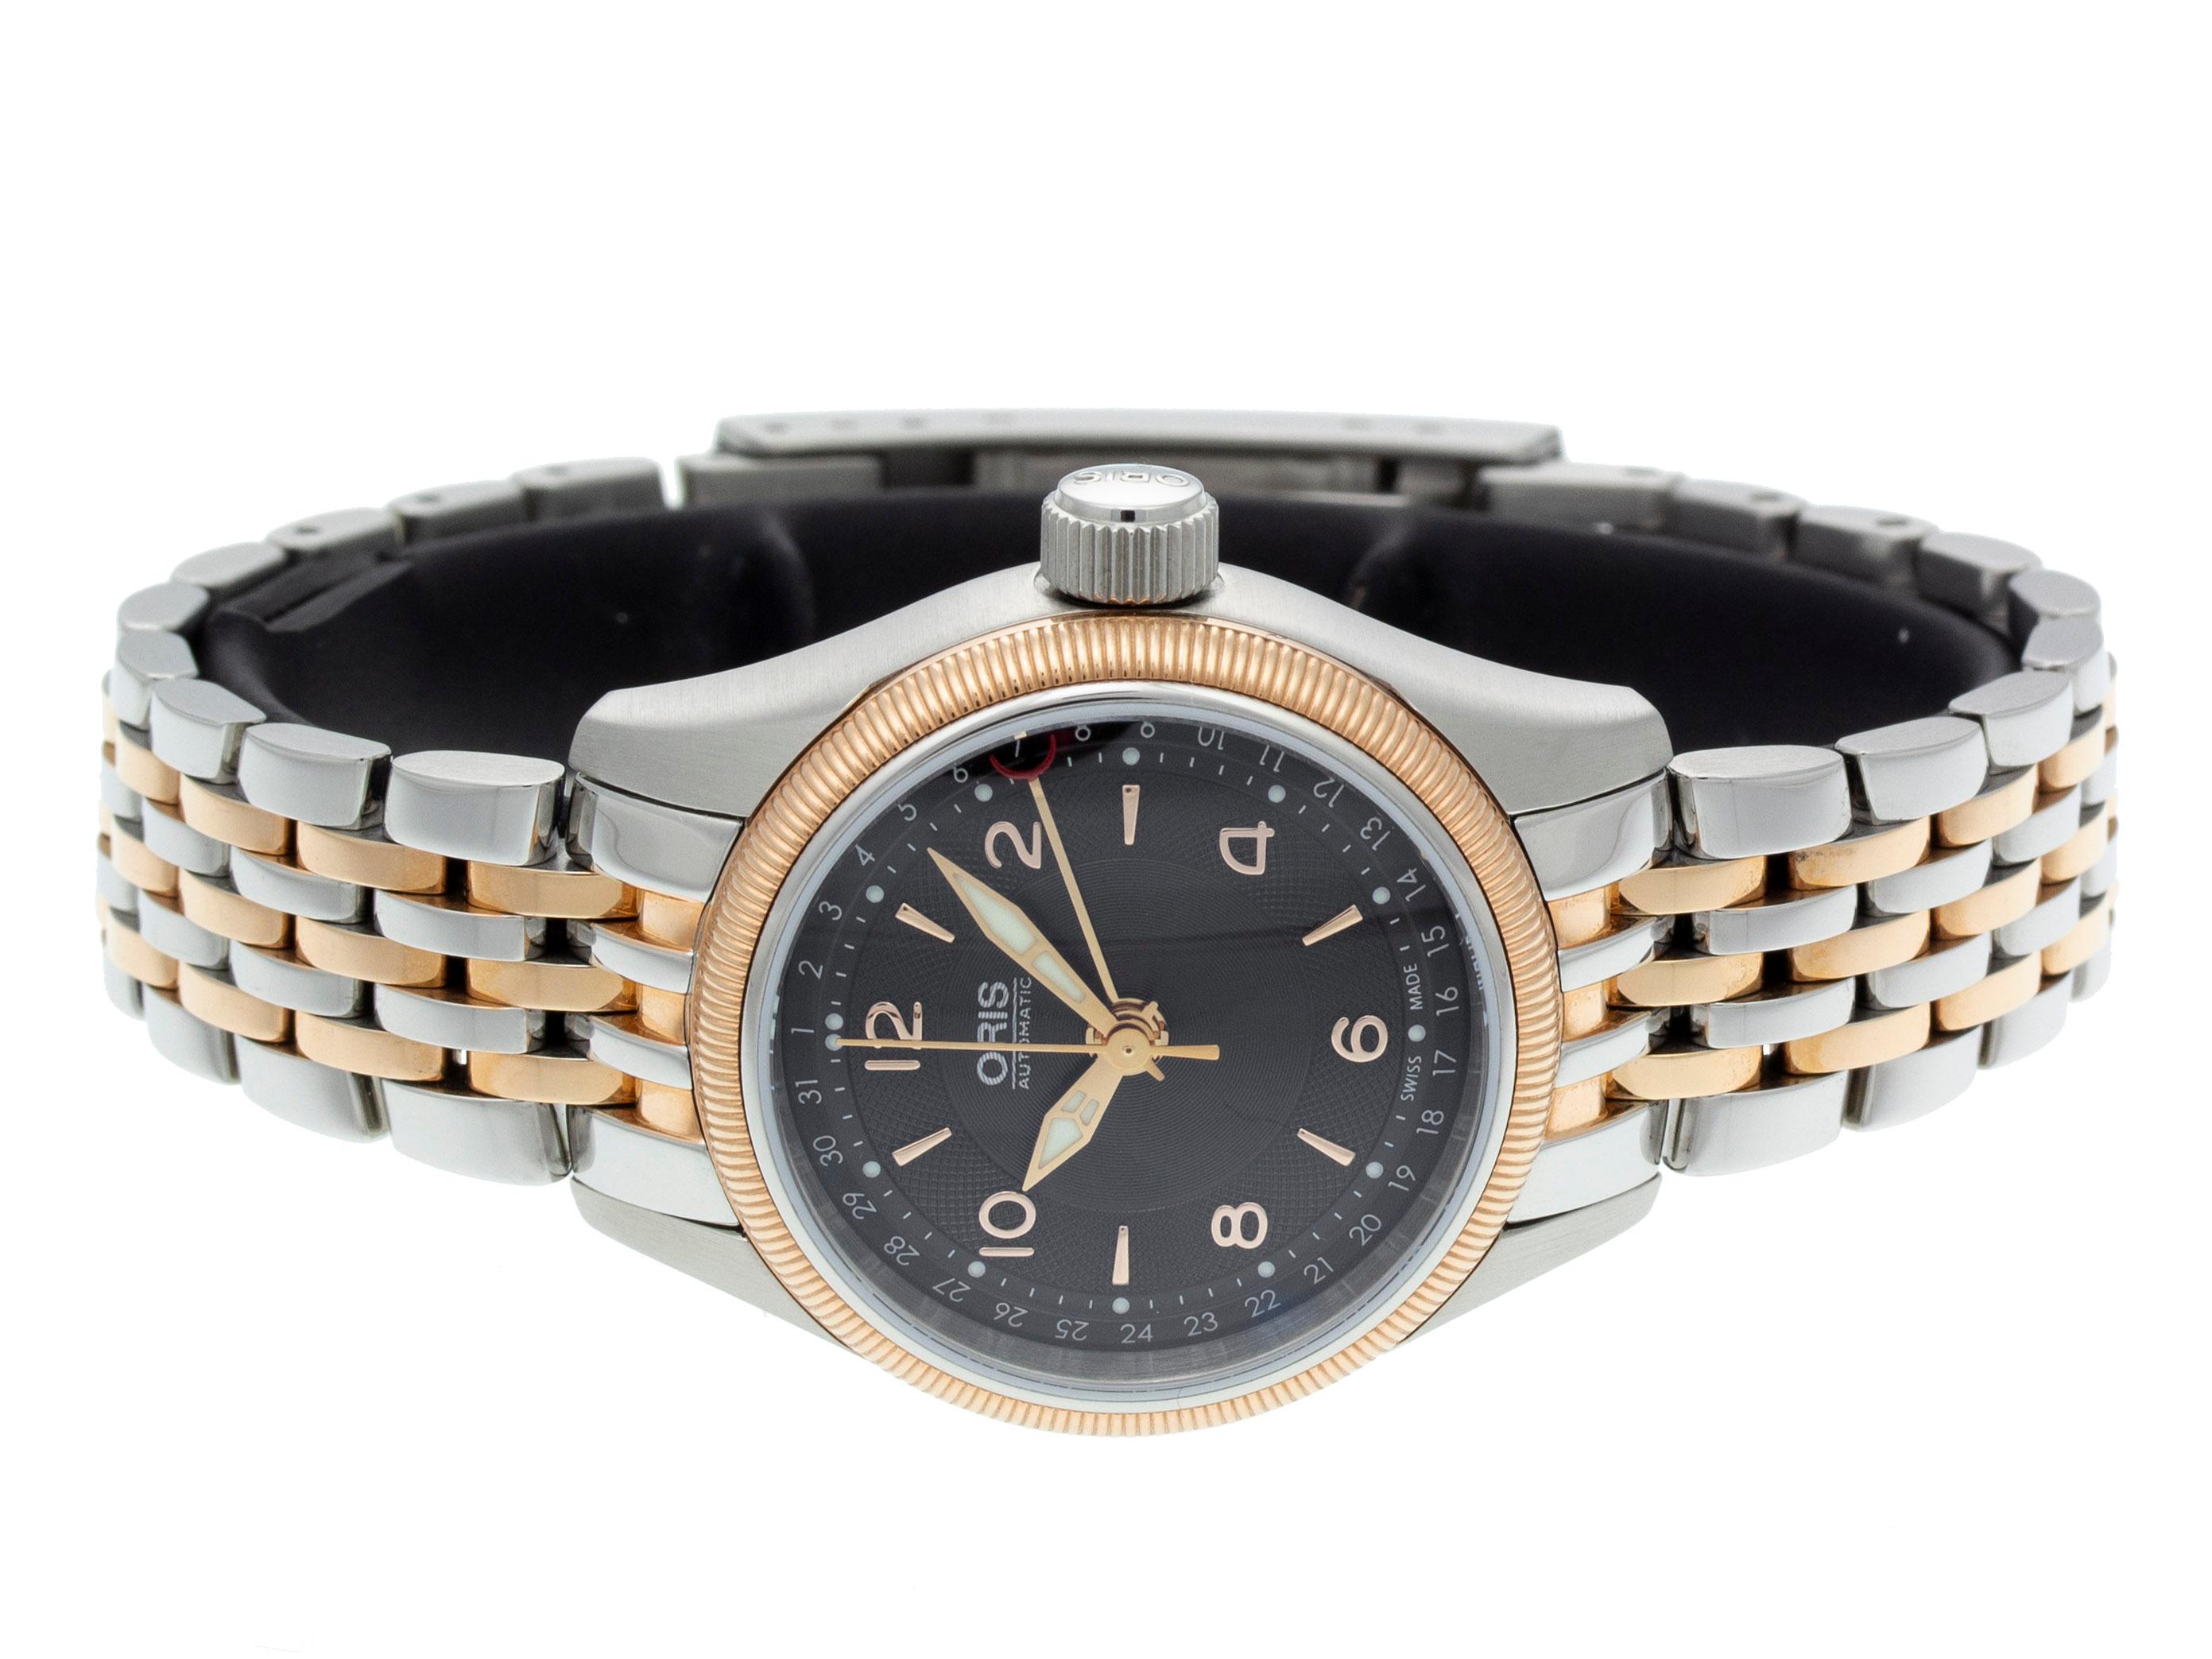 Stainless Steel & Rose Gold PVD Oris Big Crown Pointer Date Automatic Watch with a 29mm Case, Black Dial, and Bracelet with Deployment Buckle. Features include Hours, Minutes, Seconds, and Date. Comes with a Deluxe Gift Box and 2-Year Store